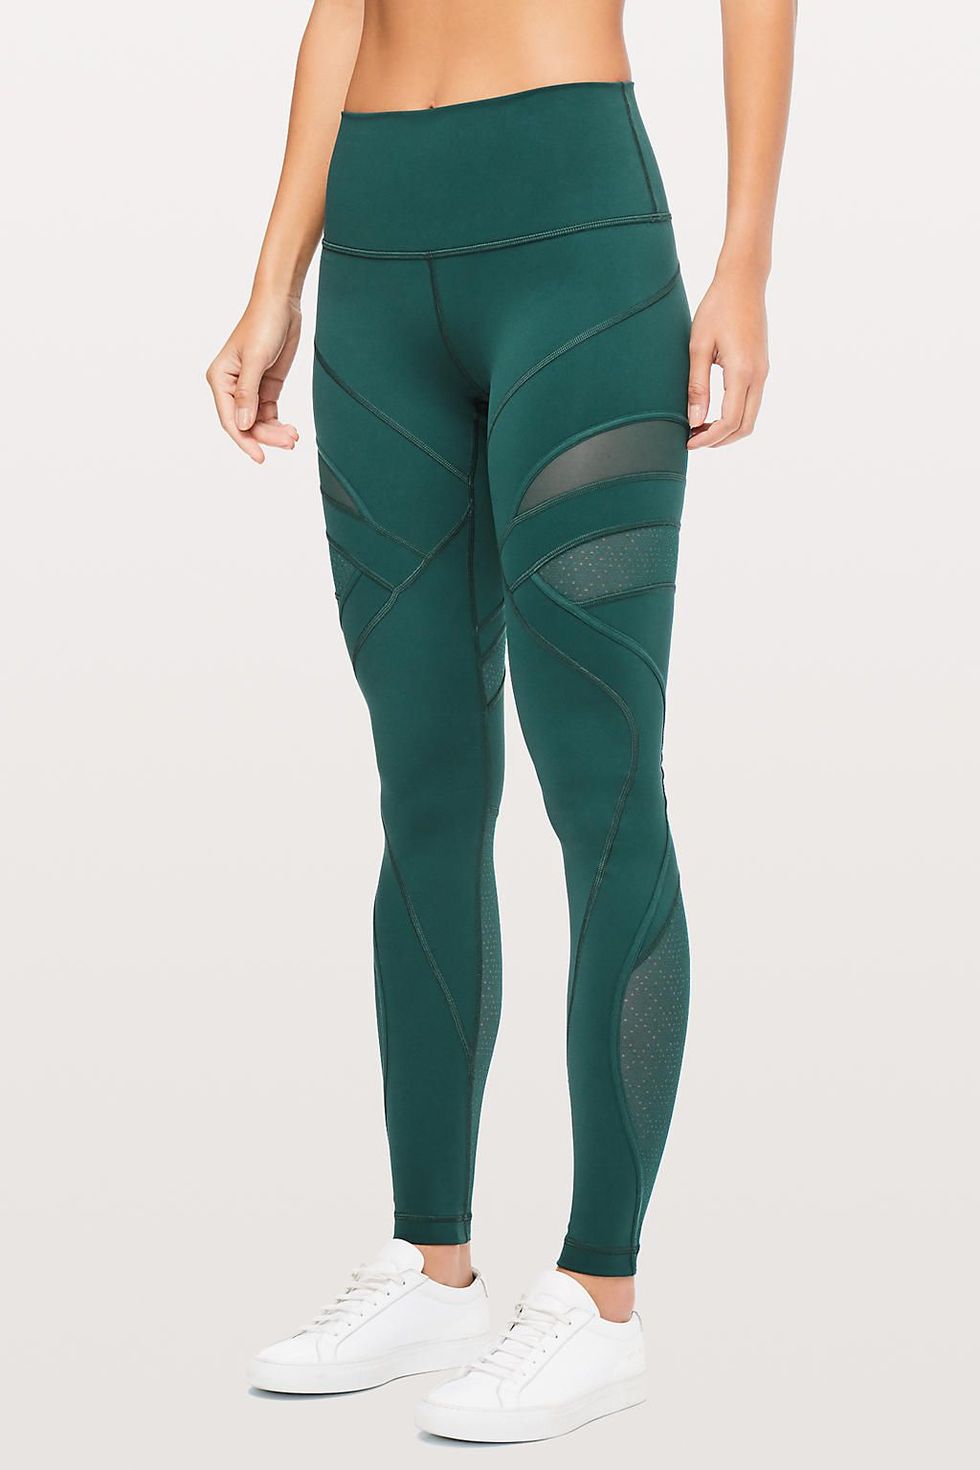 18 Best Mesh Leggings to Workout In 2022 - Stylish Mesh Tights